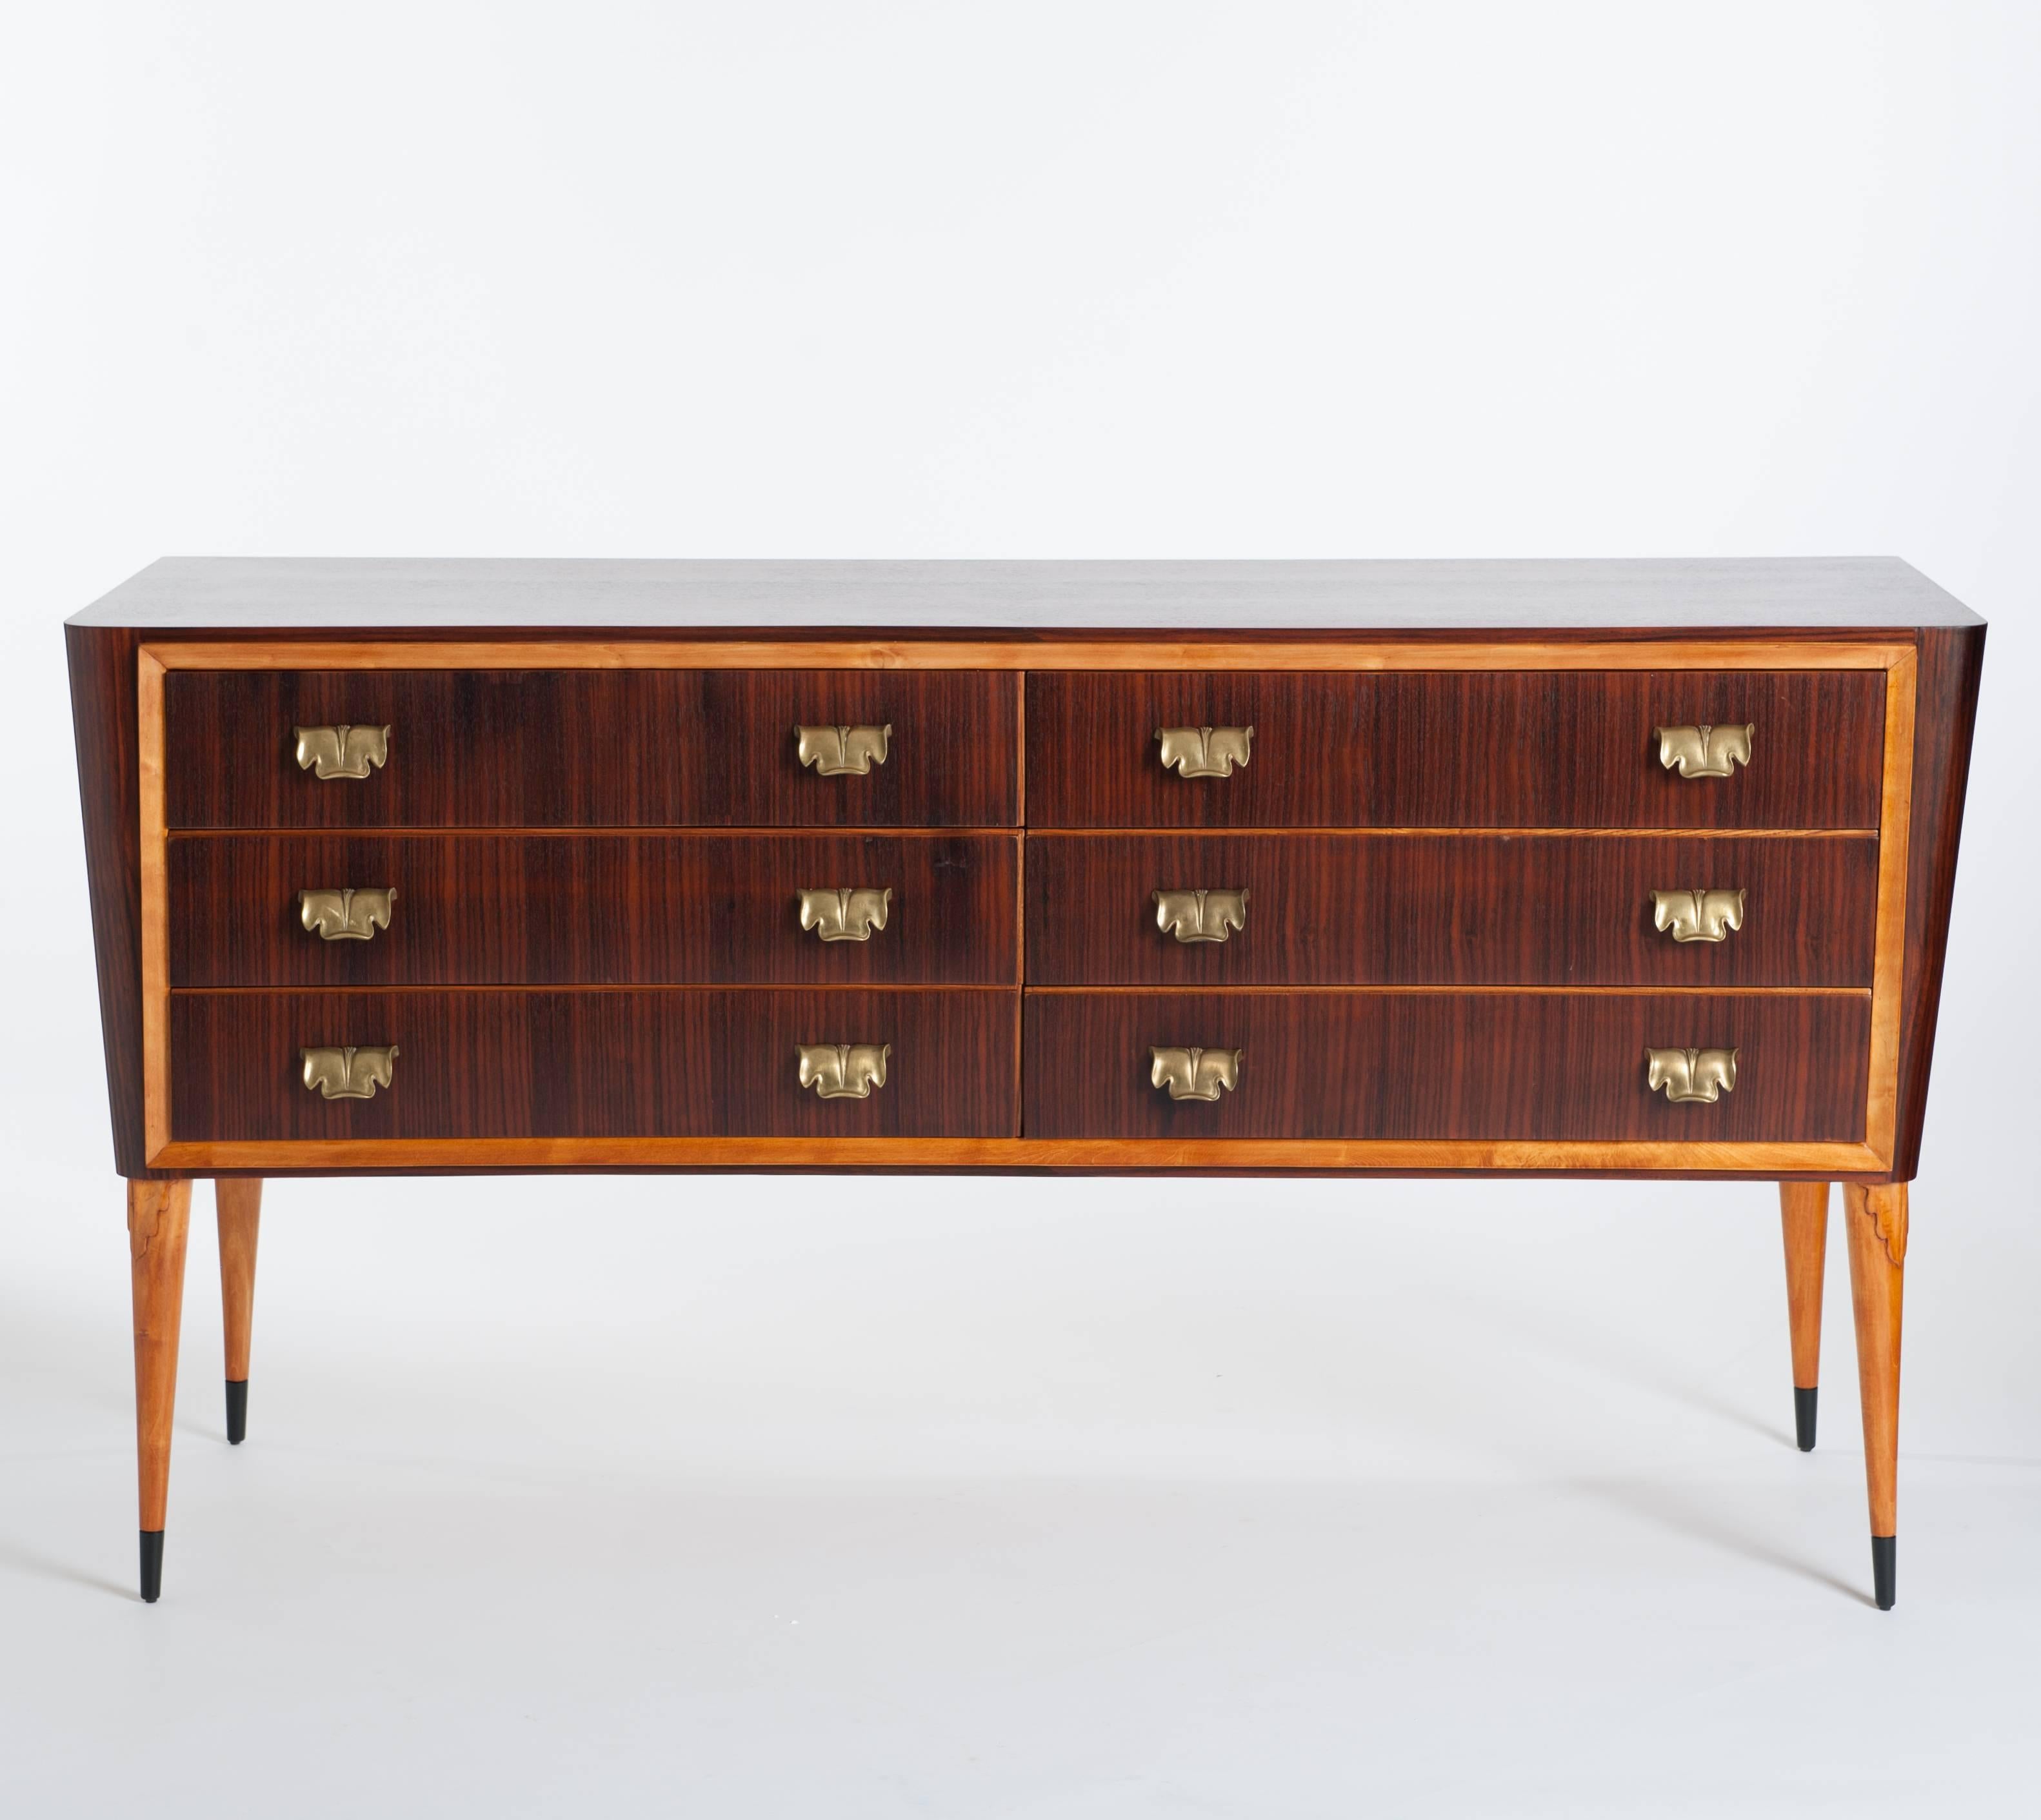 Extremely decorative and fancy 50s chest of drawers from Italy with six drawers in a wonderful choice of macassar veneer in satin matte finish.
The slightly curved drawer front is framed by blond sycamore wood on elegant high legs. 
The tapered legs